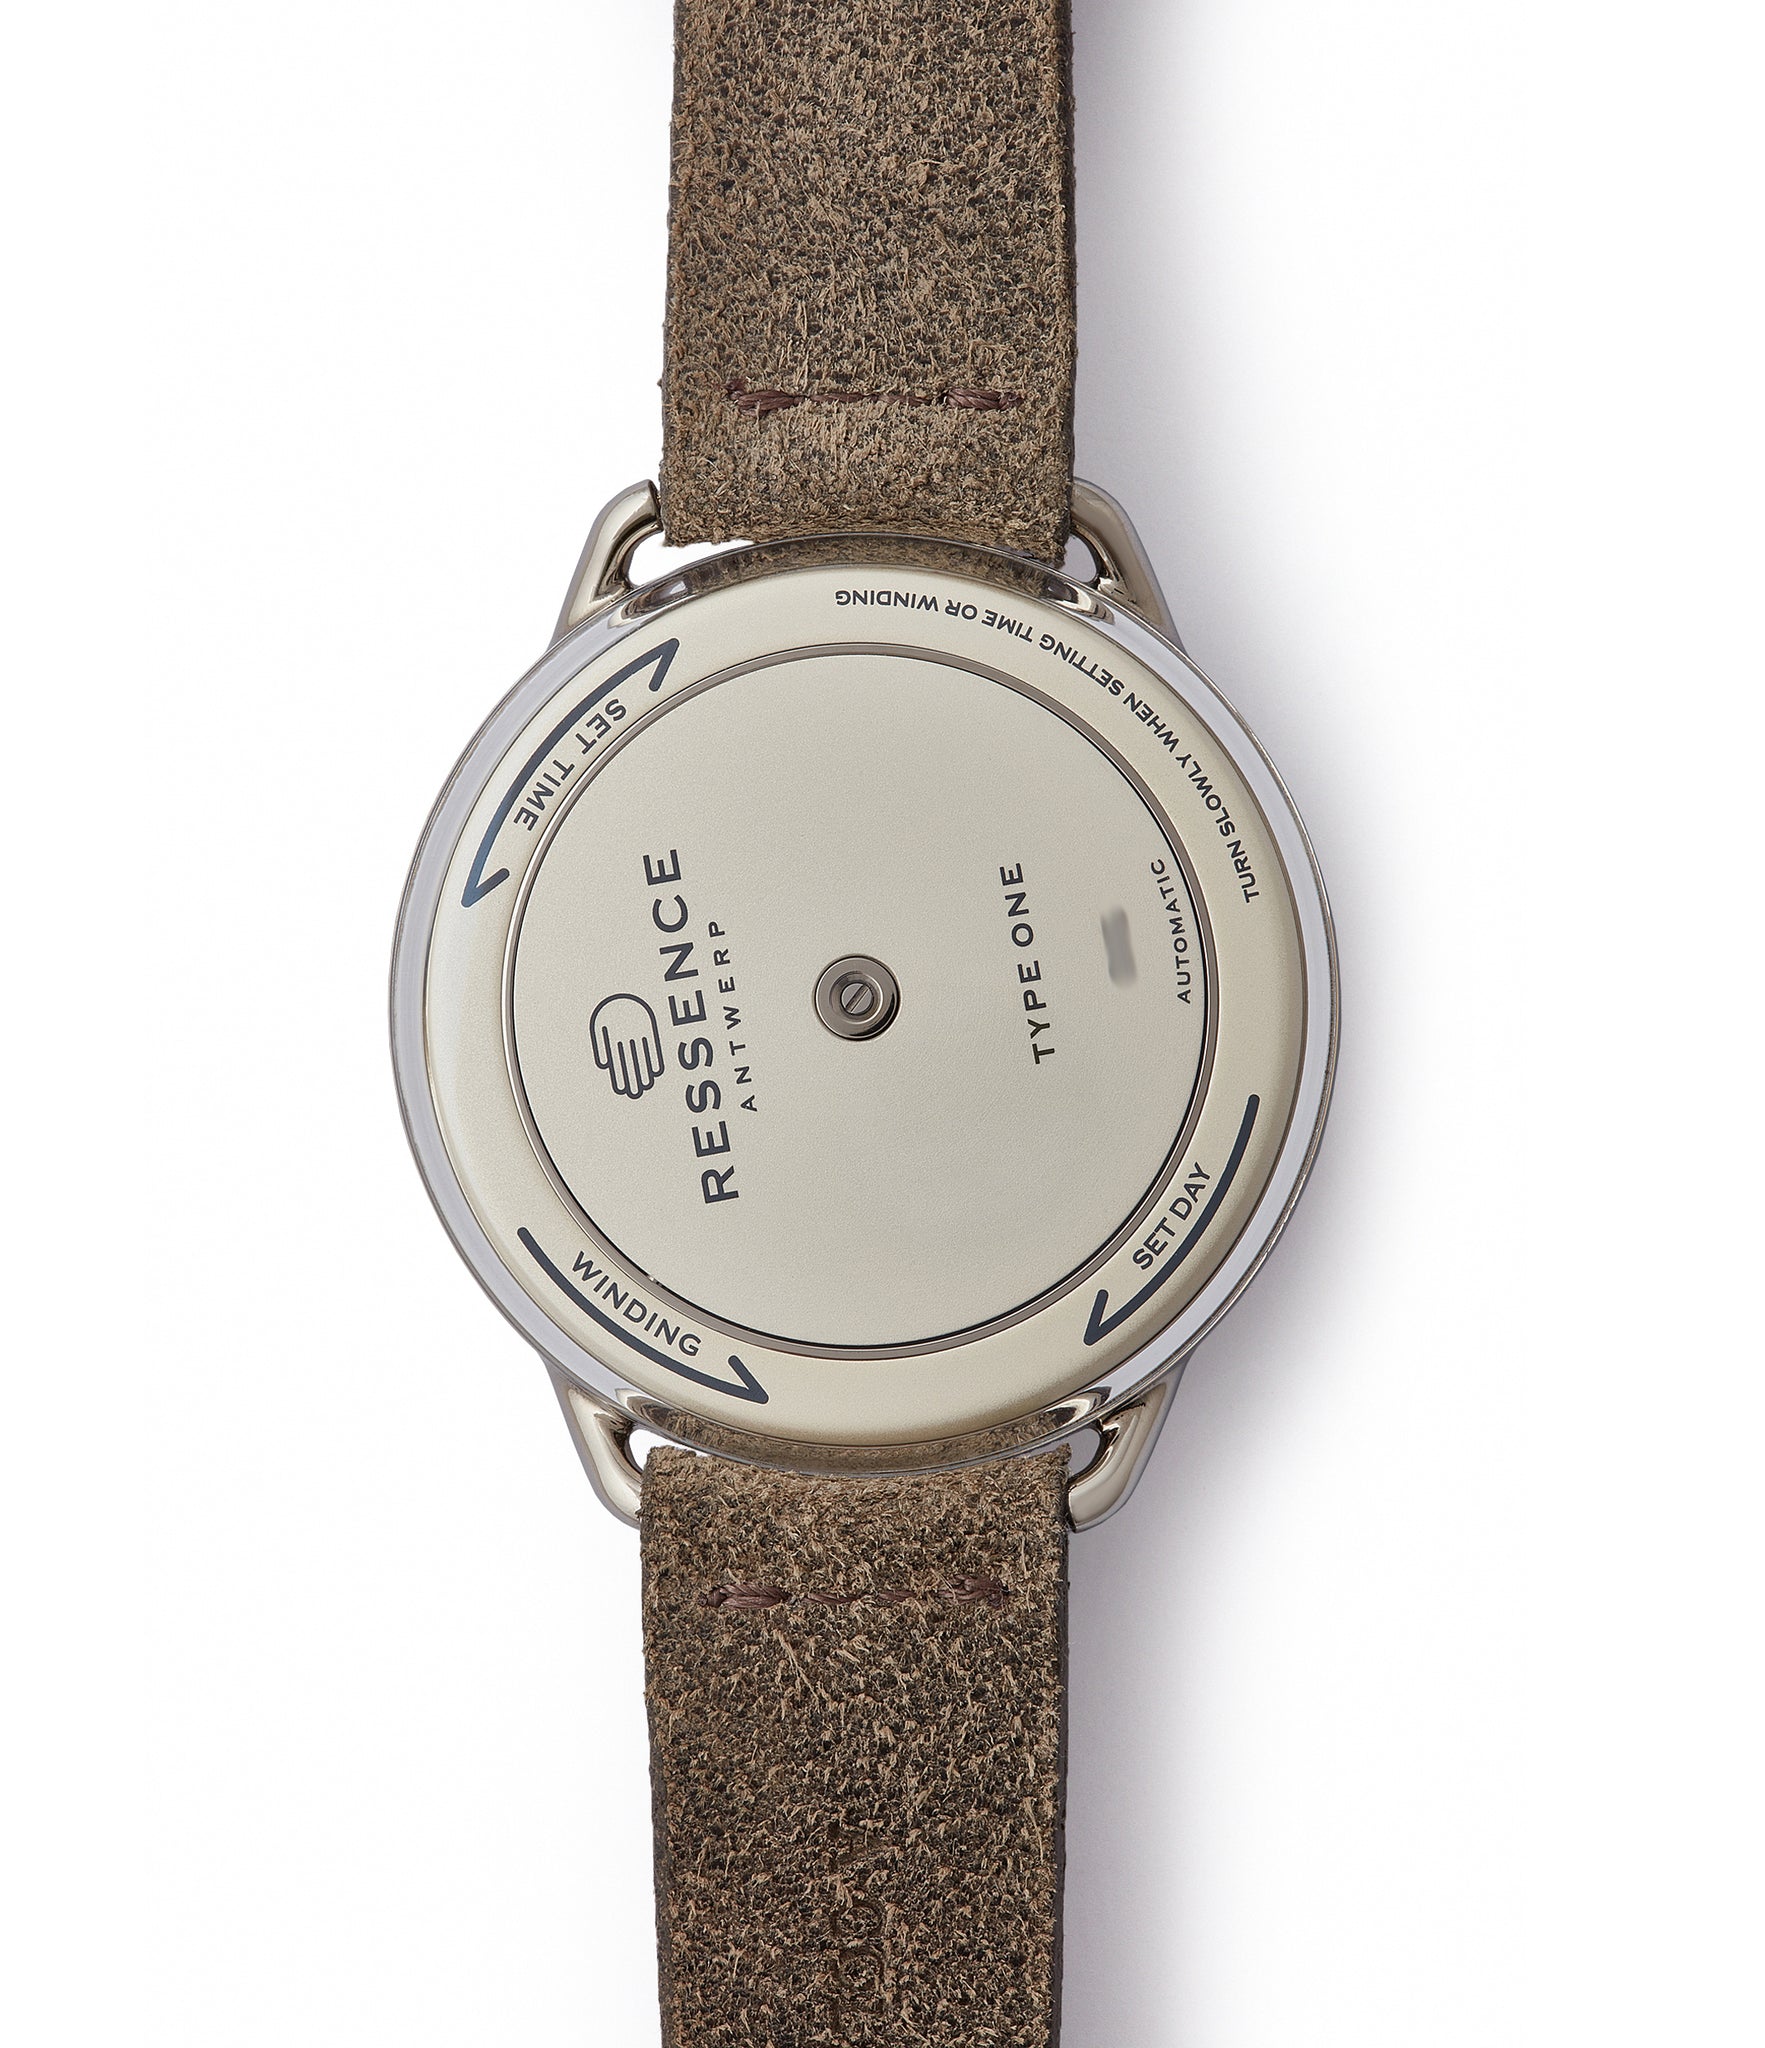 Ressence Type 1 Mechanical 42mm Titanium and Ostrich Watch for sale online at A Collected Man